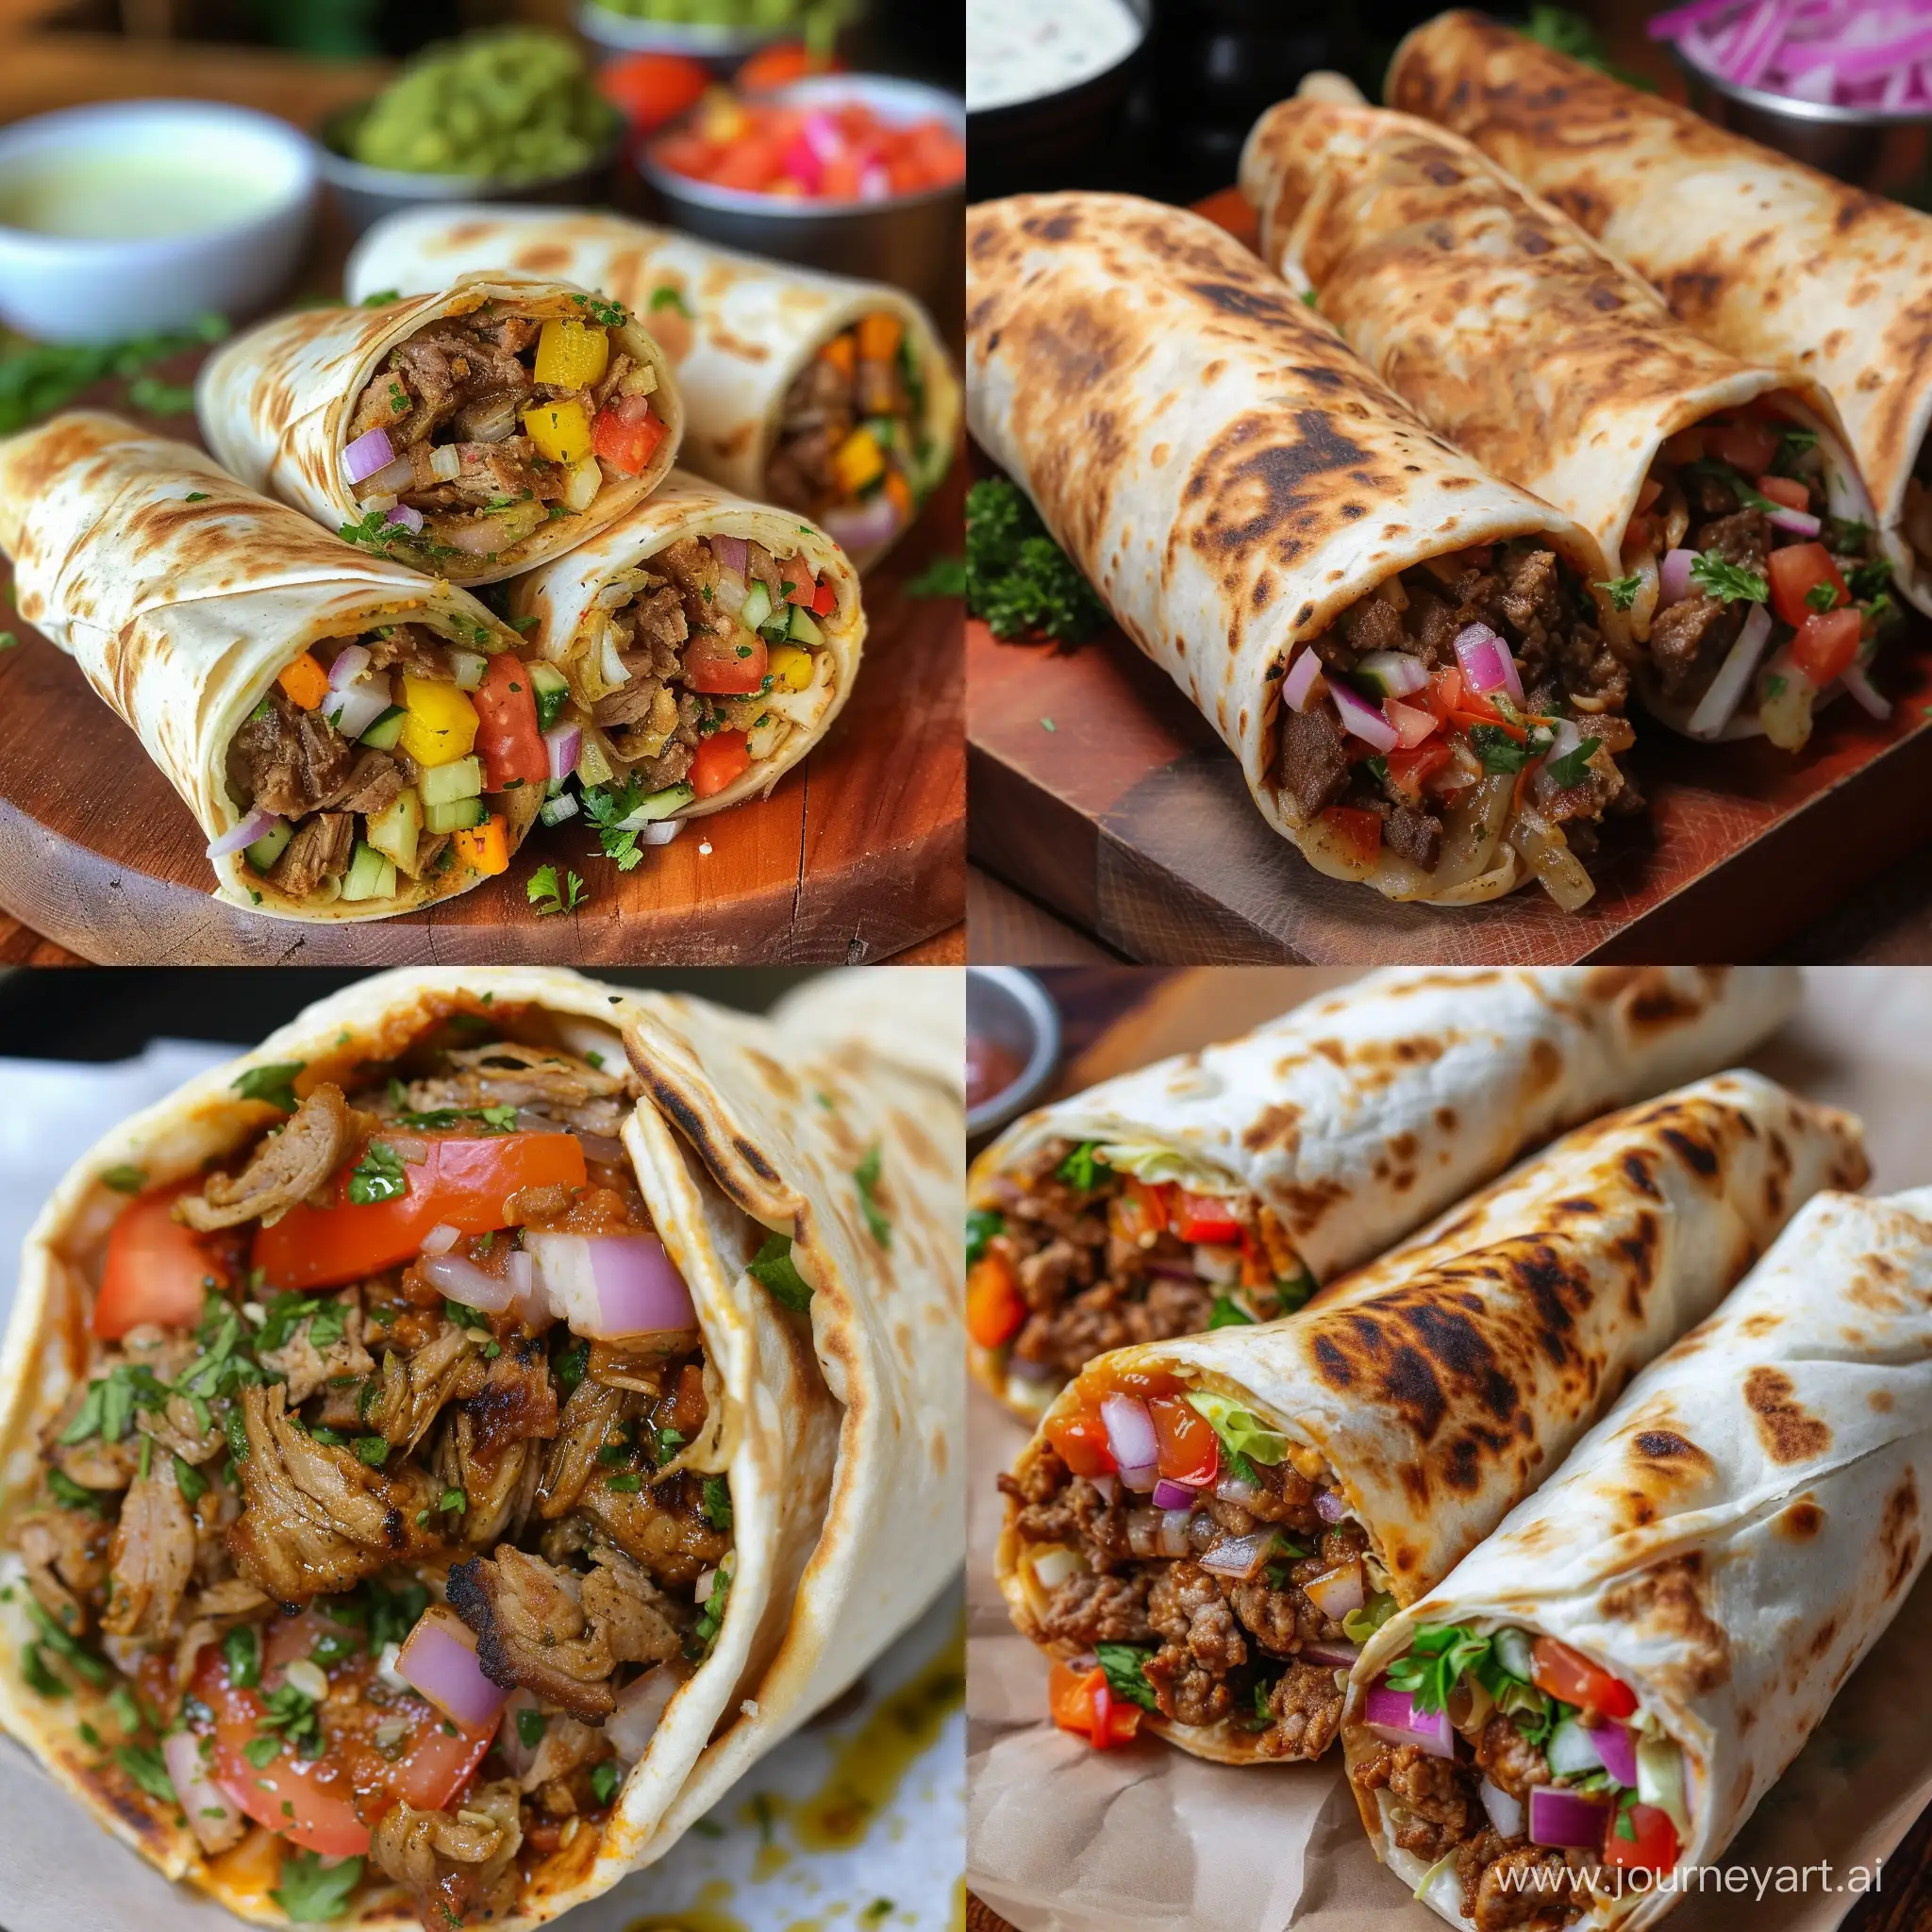 Delicious-Shawarma-on-Square-Plate-HighResolution-Culinary-Photography